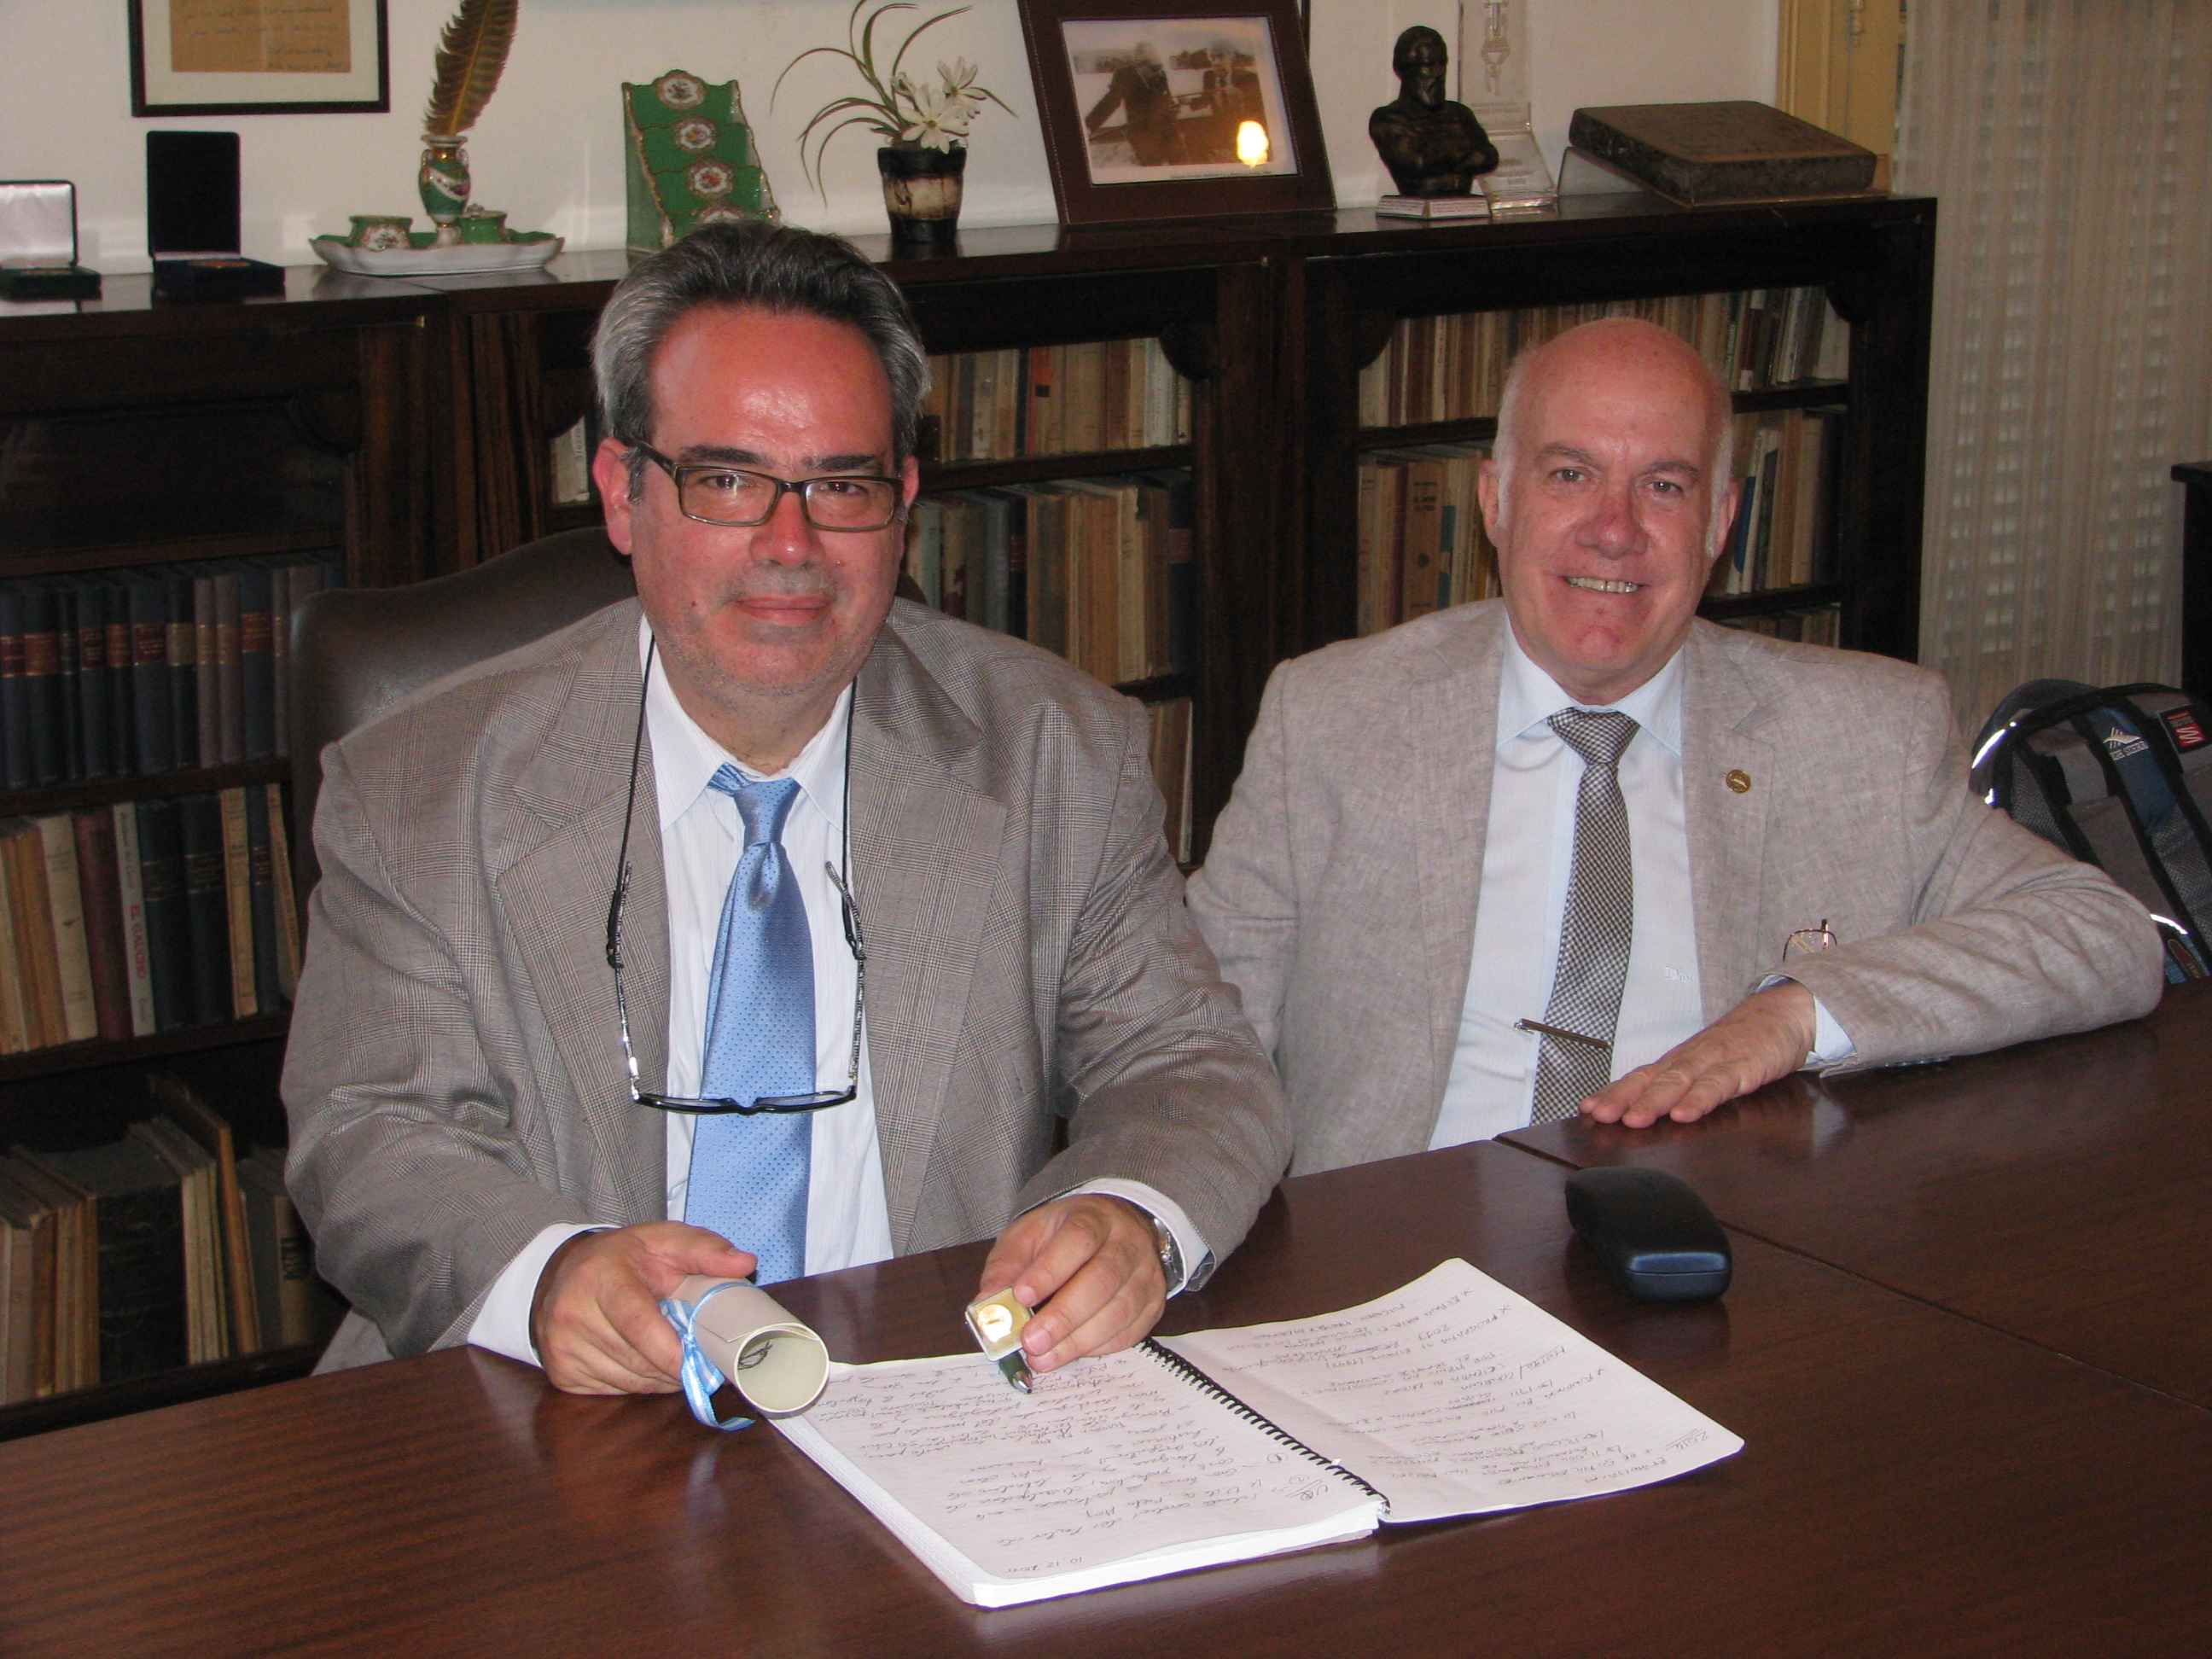 Dr Roberto Esposto and President of the Argentine Academy of Letters Dr Jose Luis Moure